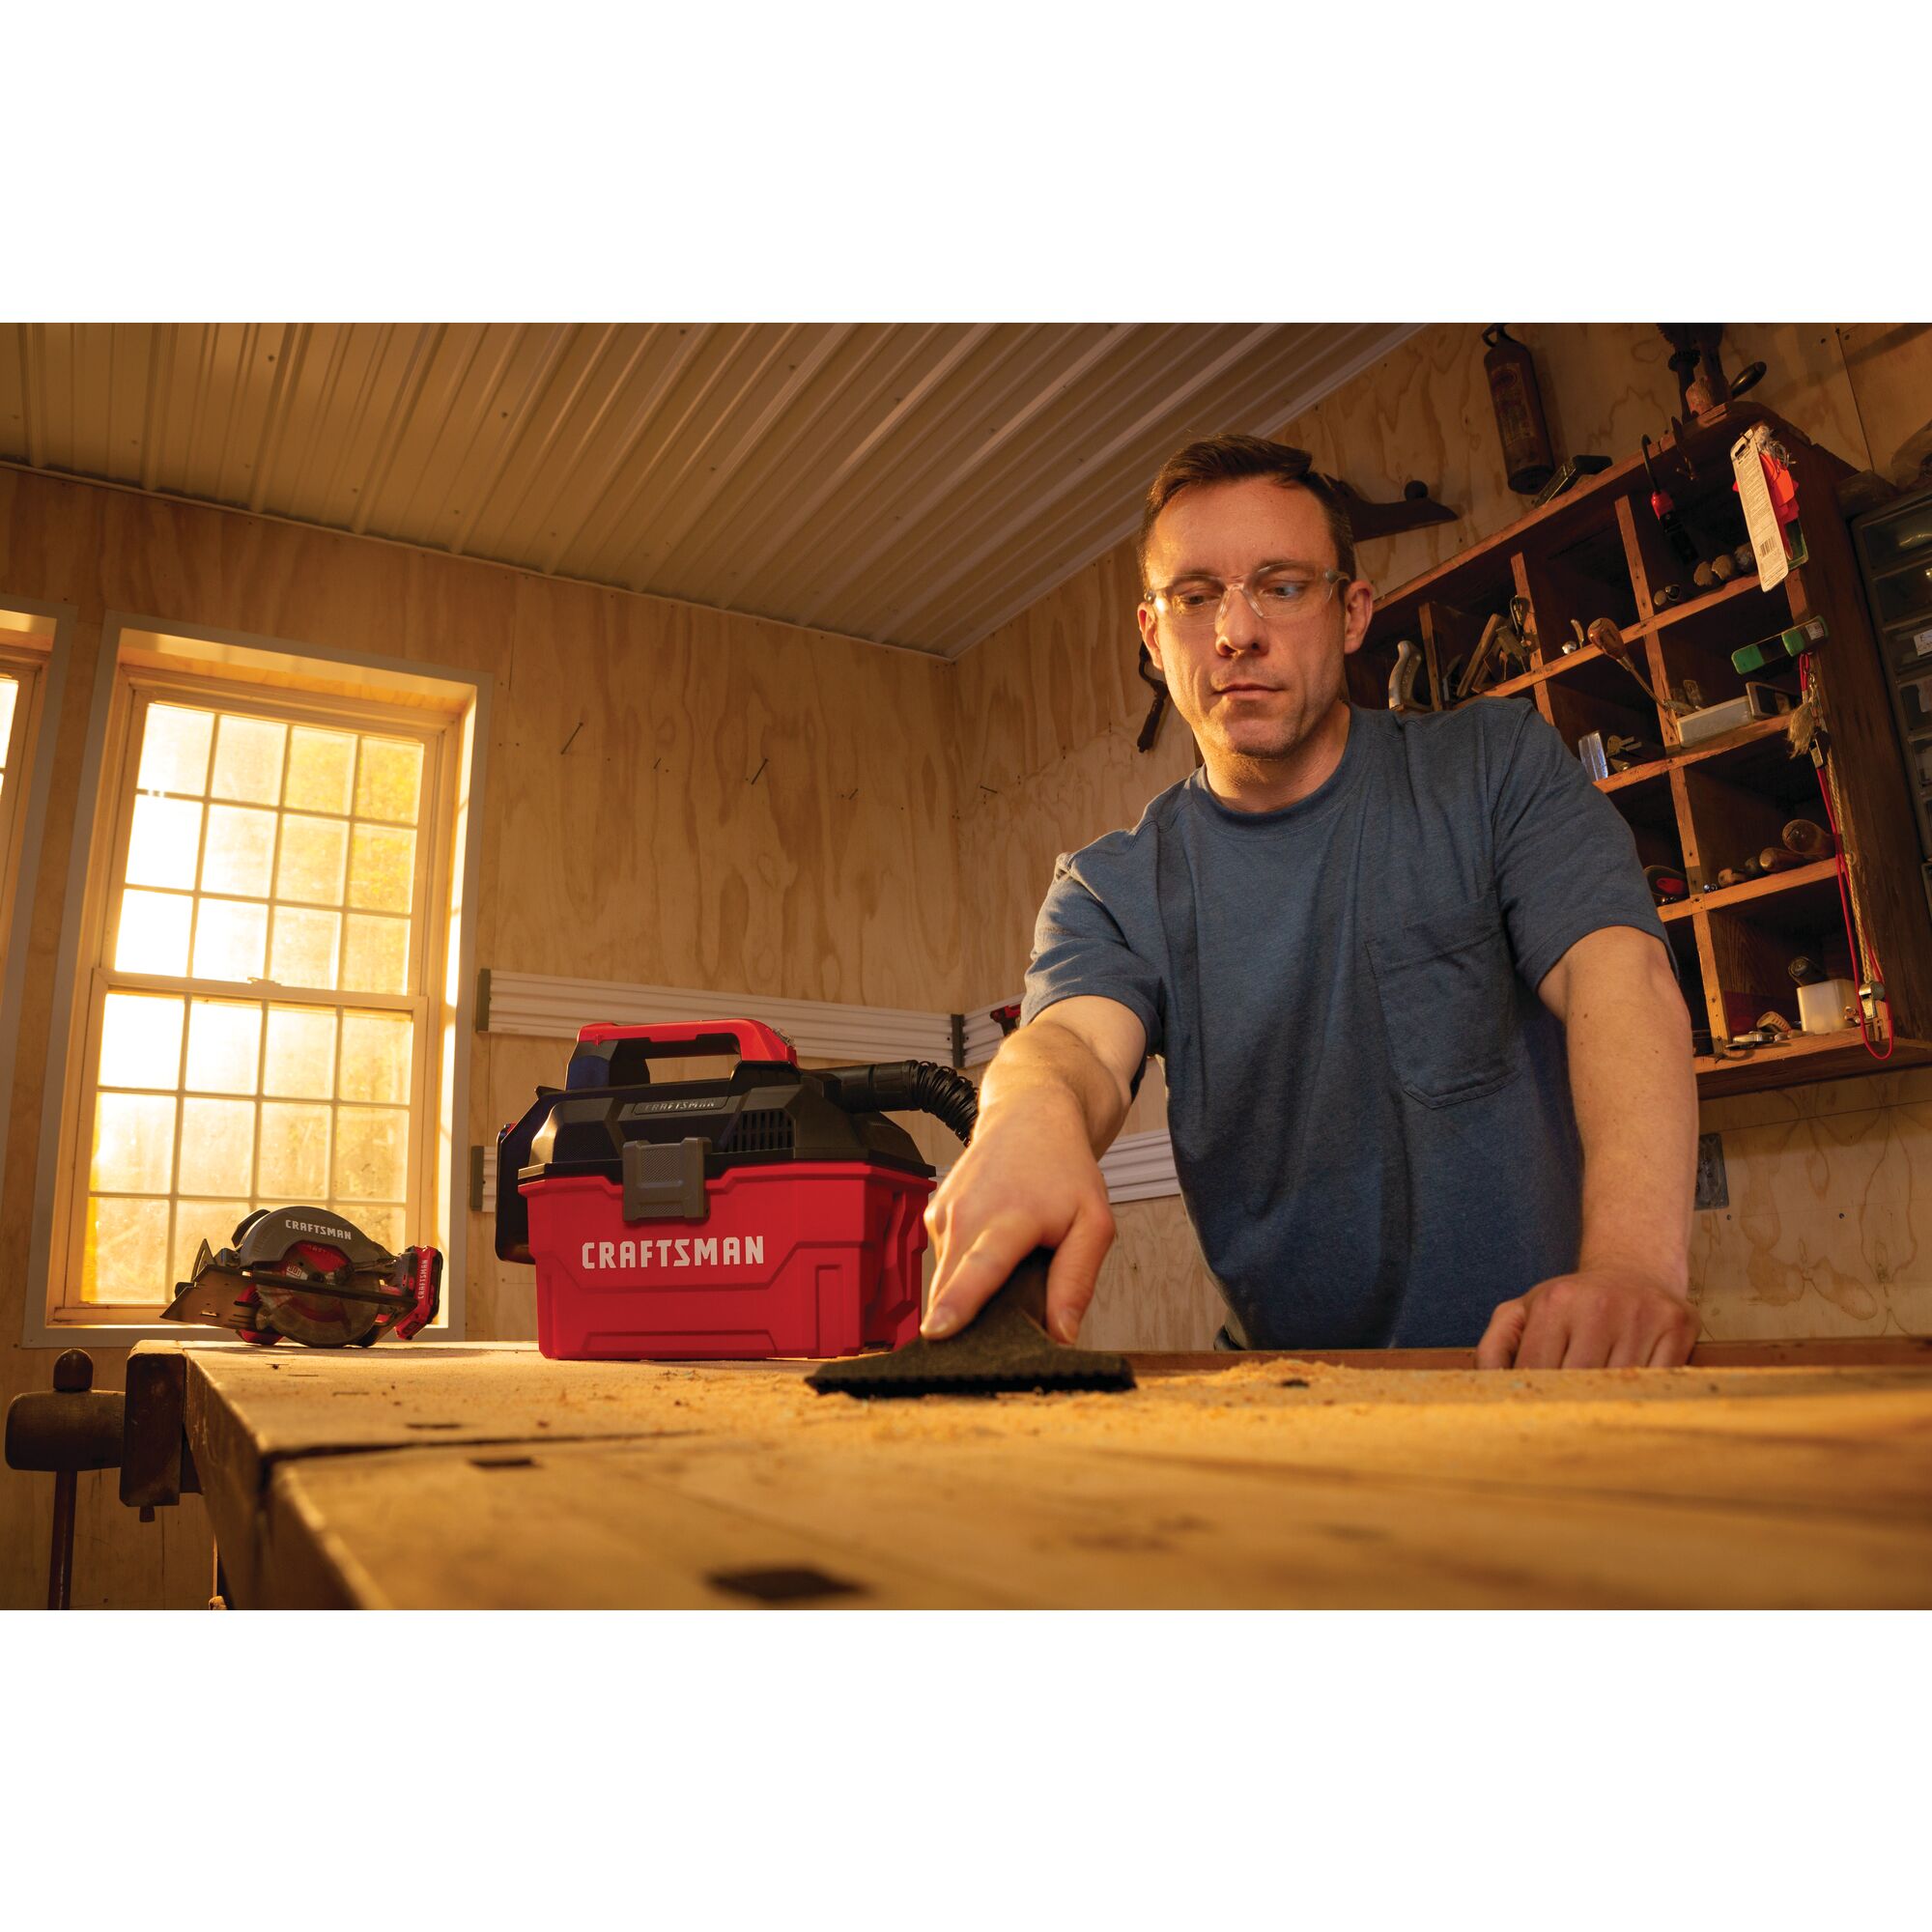 20 volt cordless 2 gallon wet dry vacuum being used by a person to clean wooden work station.